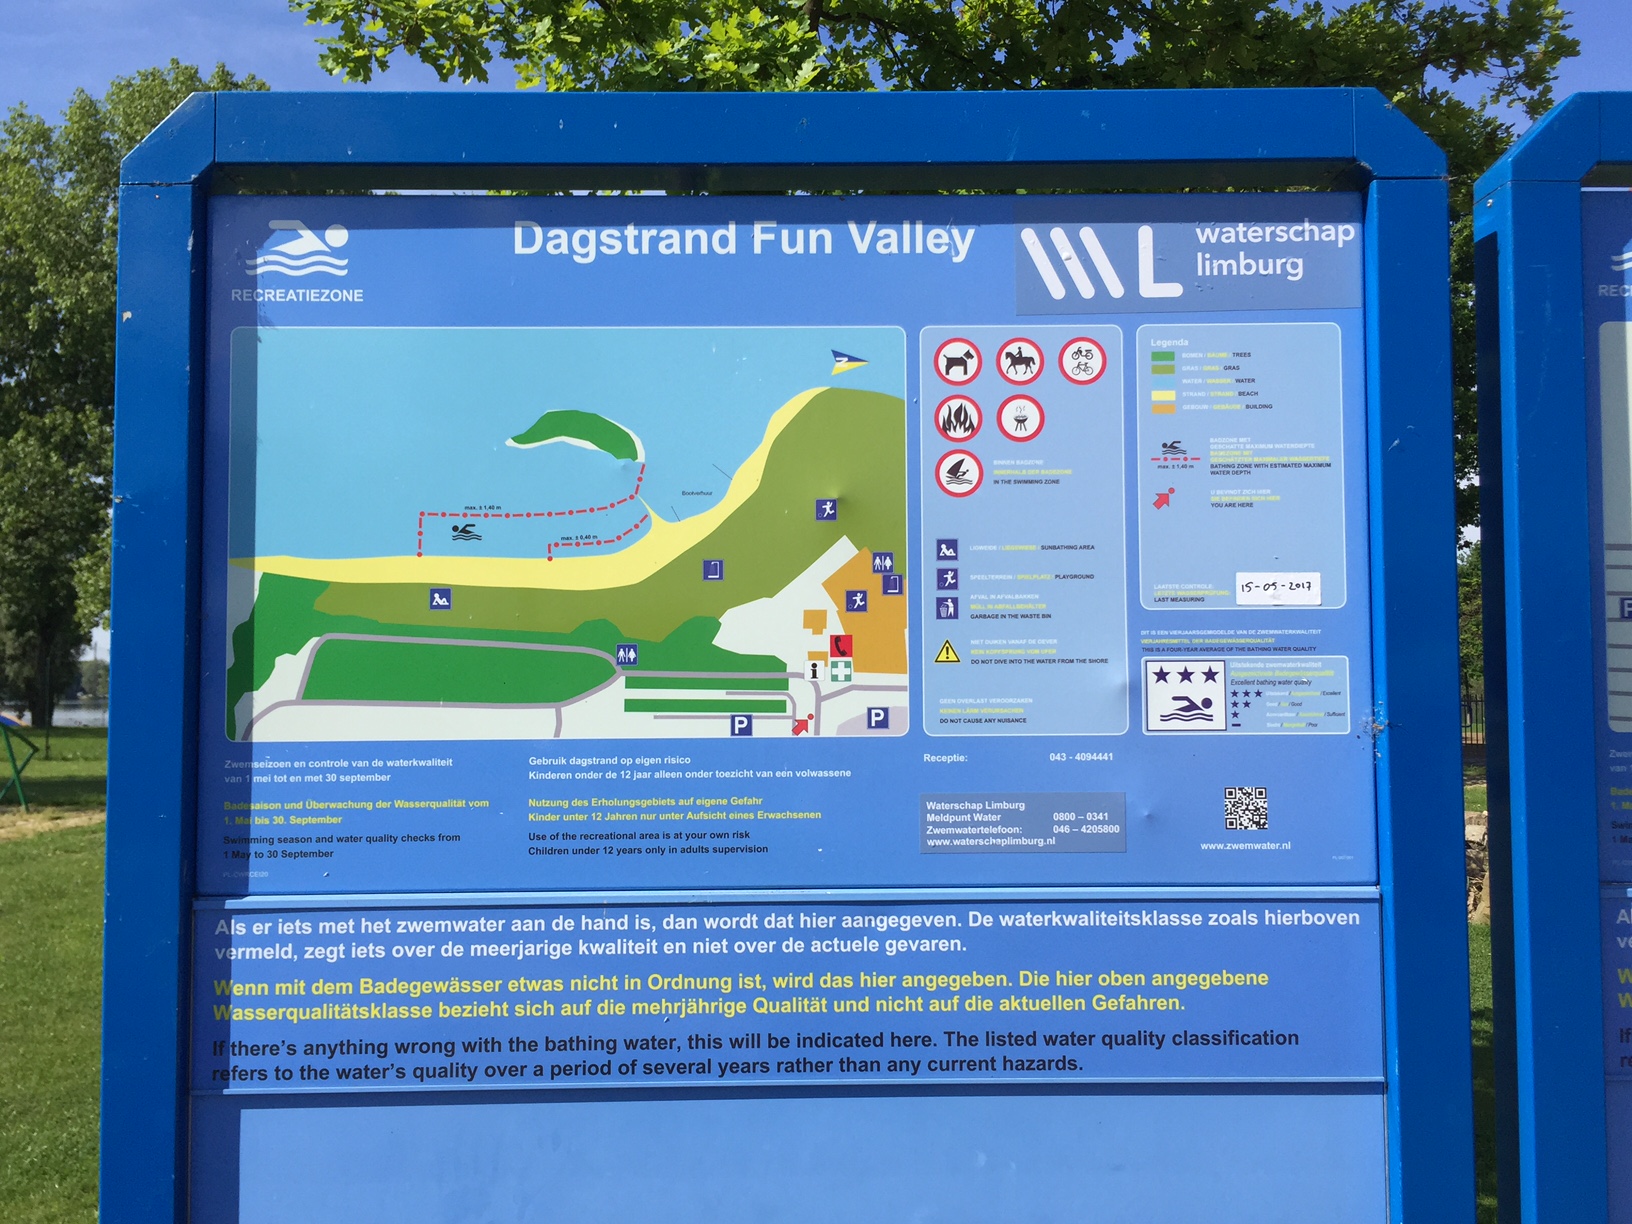 The information board at the swimming location Dagstrand Fun Valley